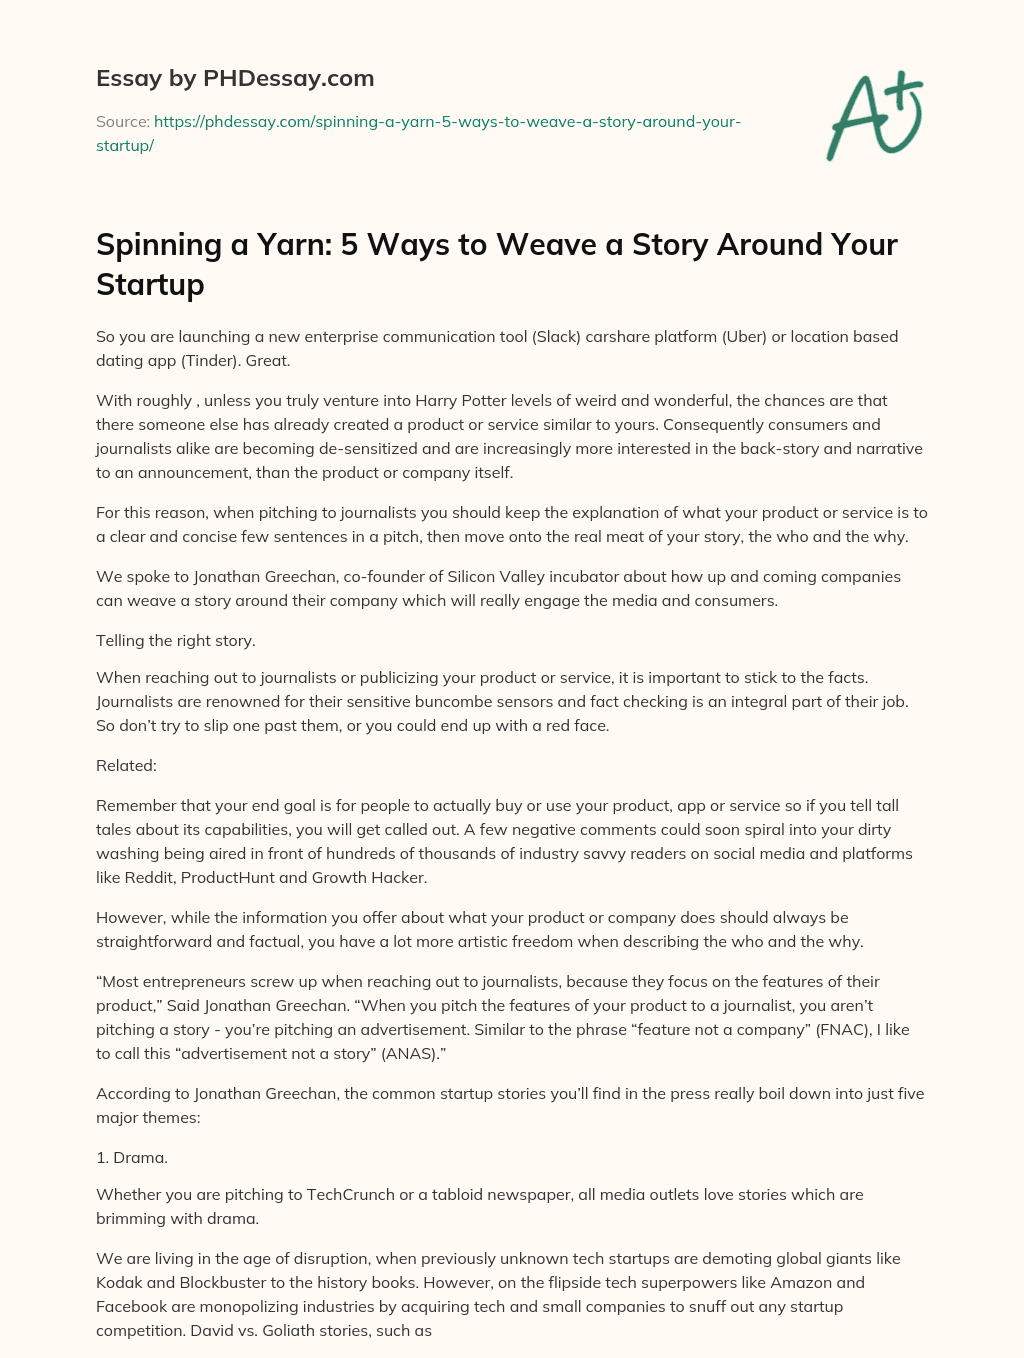 Spinning a Yarn: 5 Ways to Weave a Story Around Your Startup essay